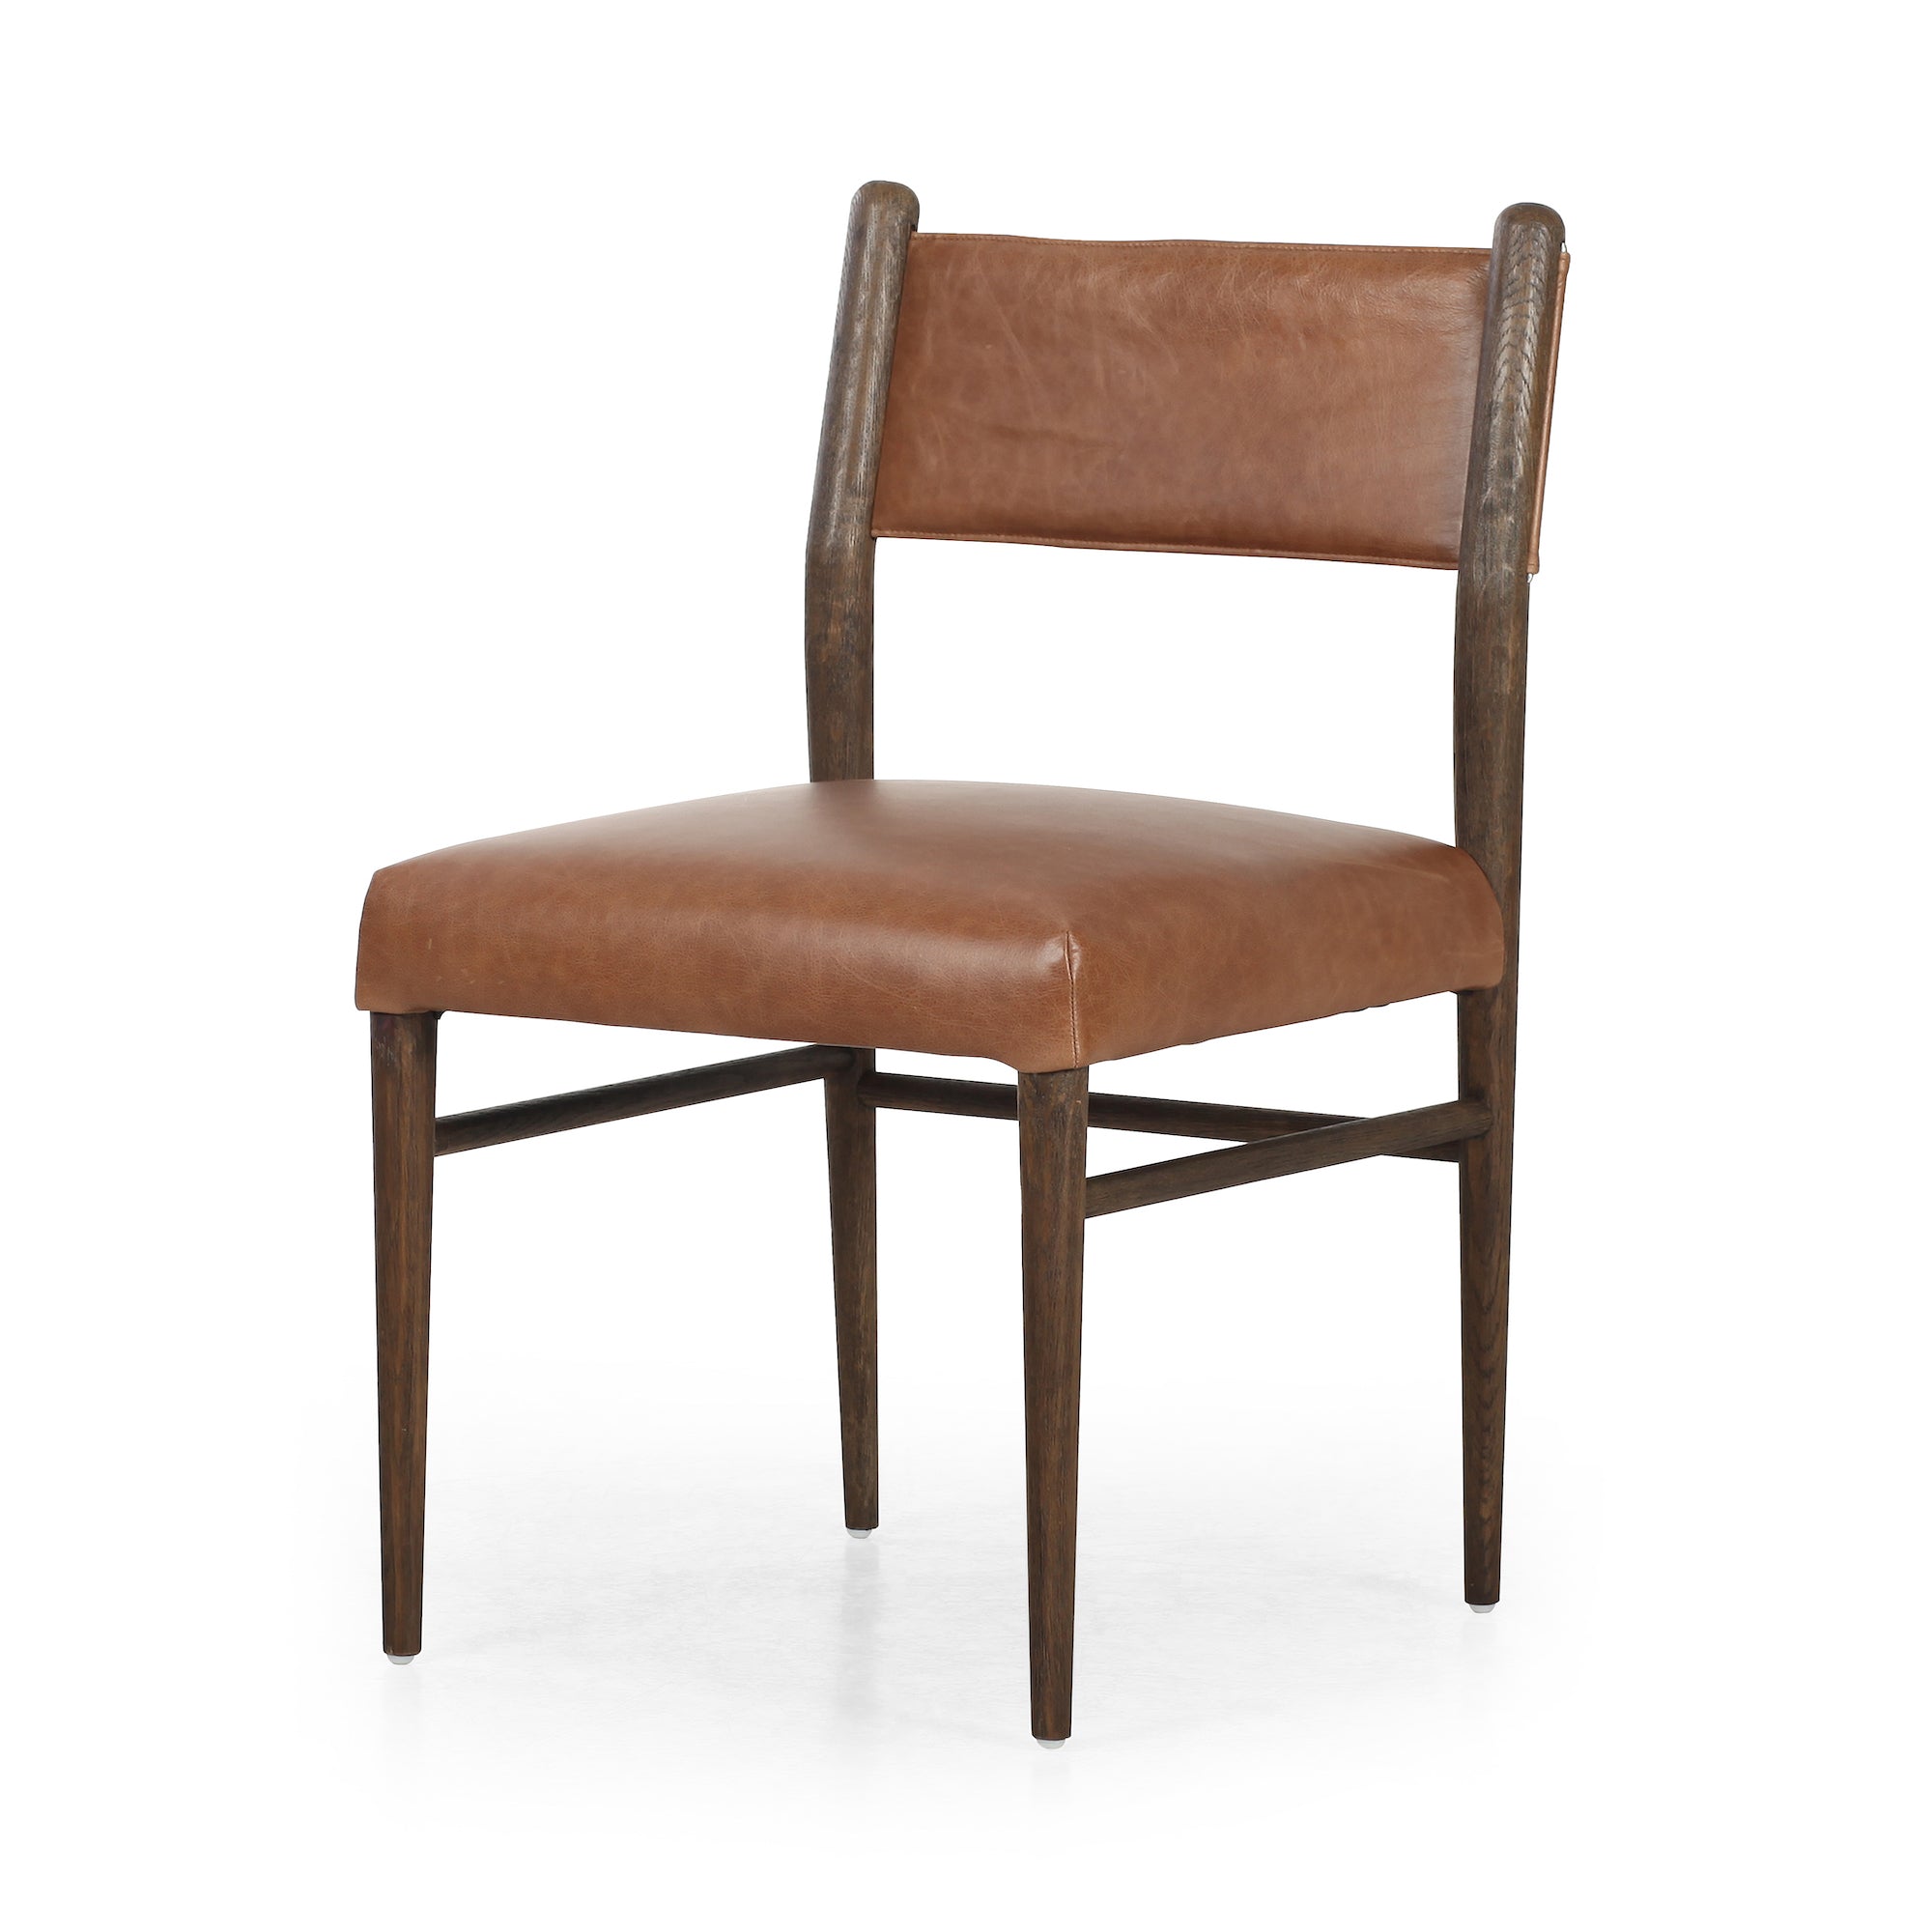 Morena Dining Chair